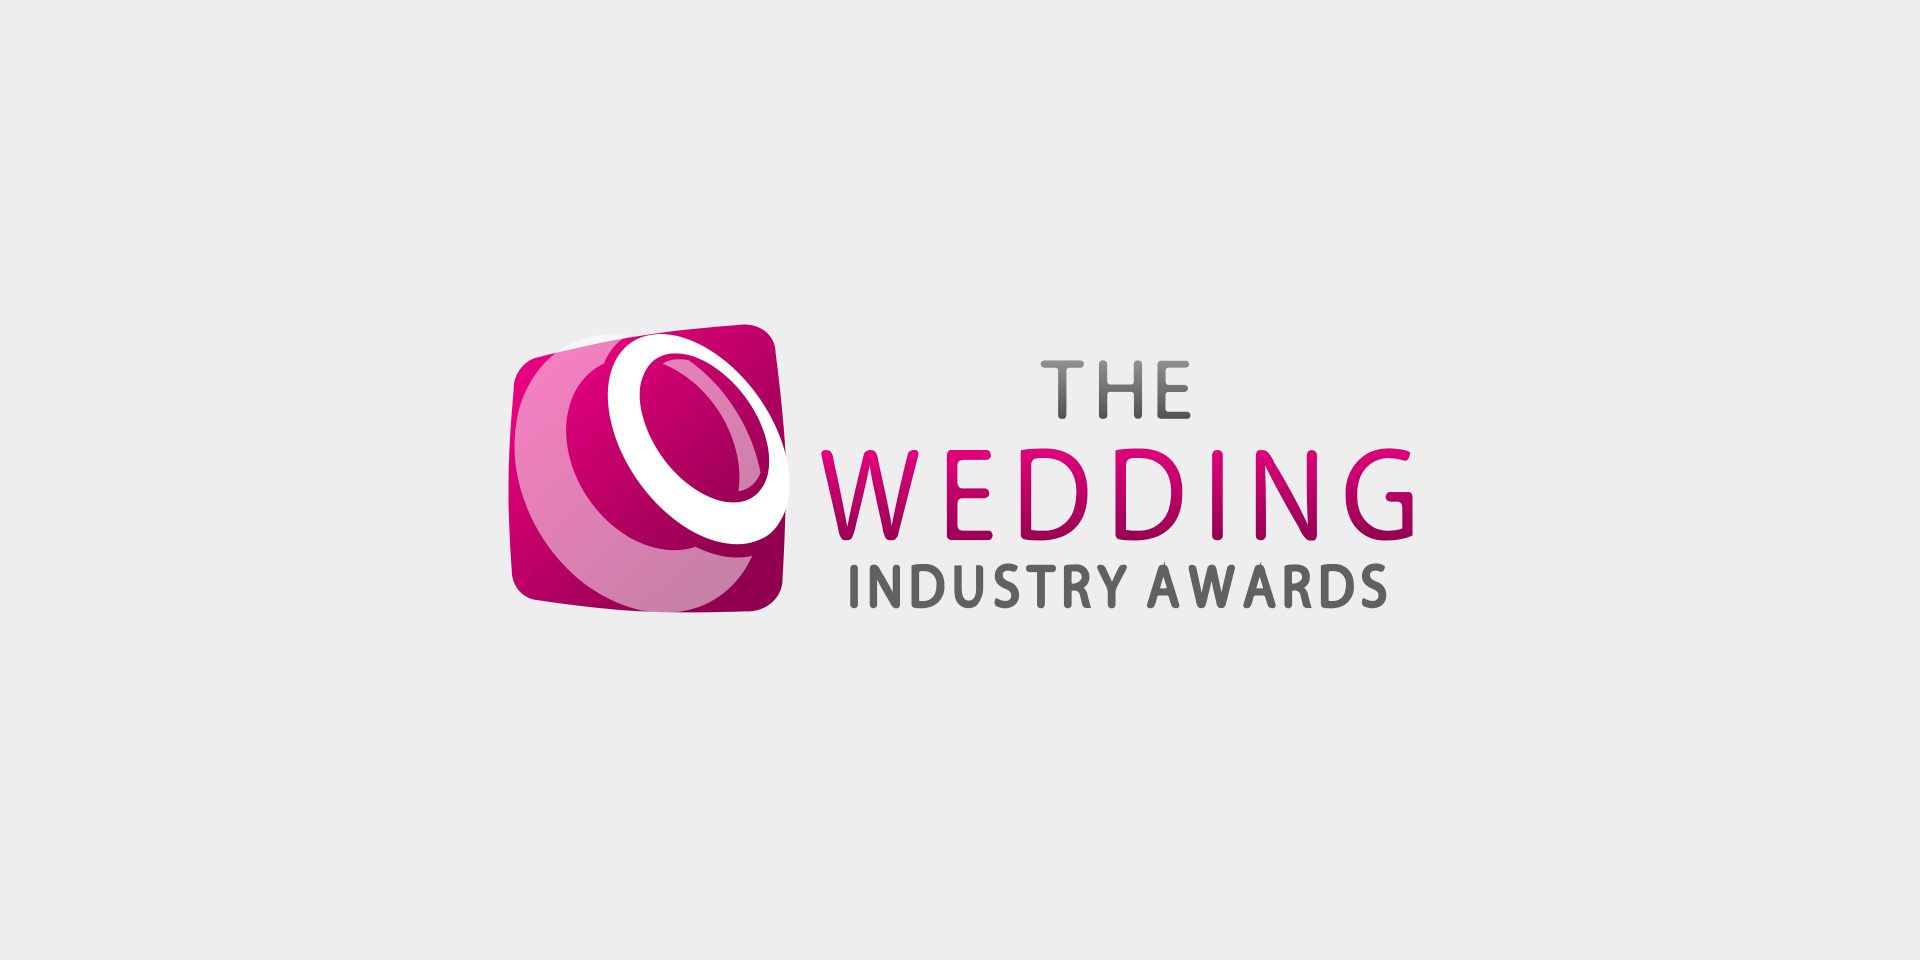 Rivervale Barn in Hampshire were thrilled to be the winners at The Wedding Industry Awards